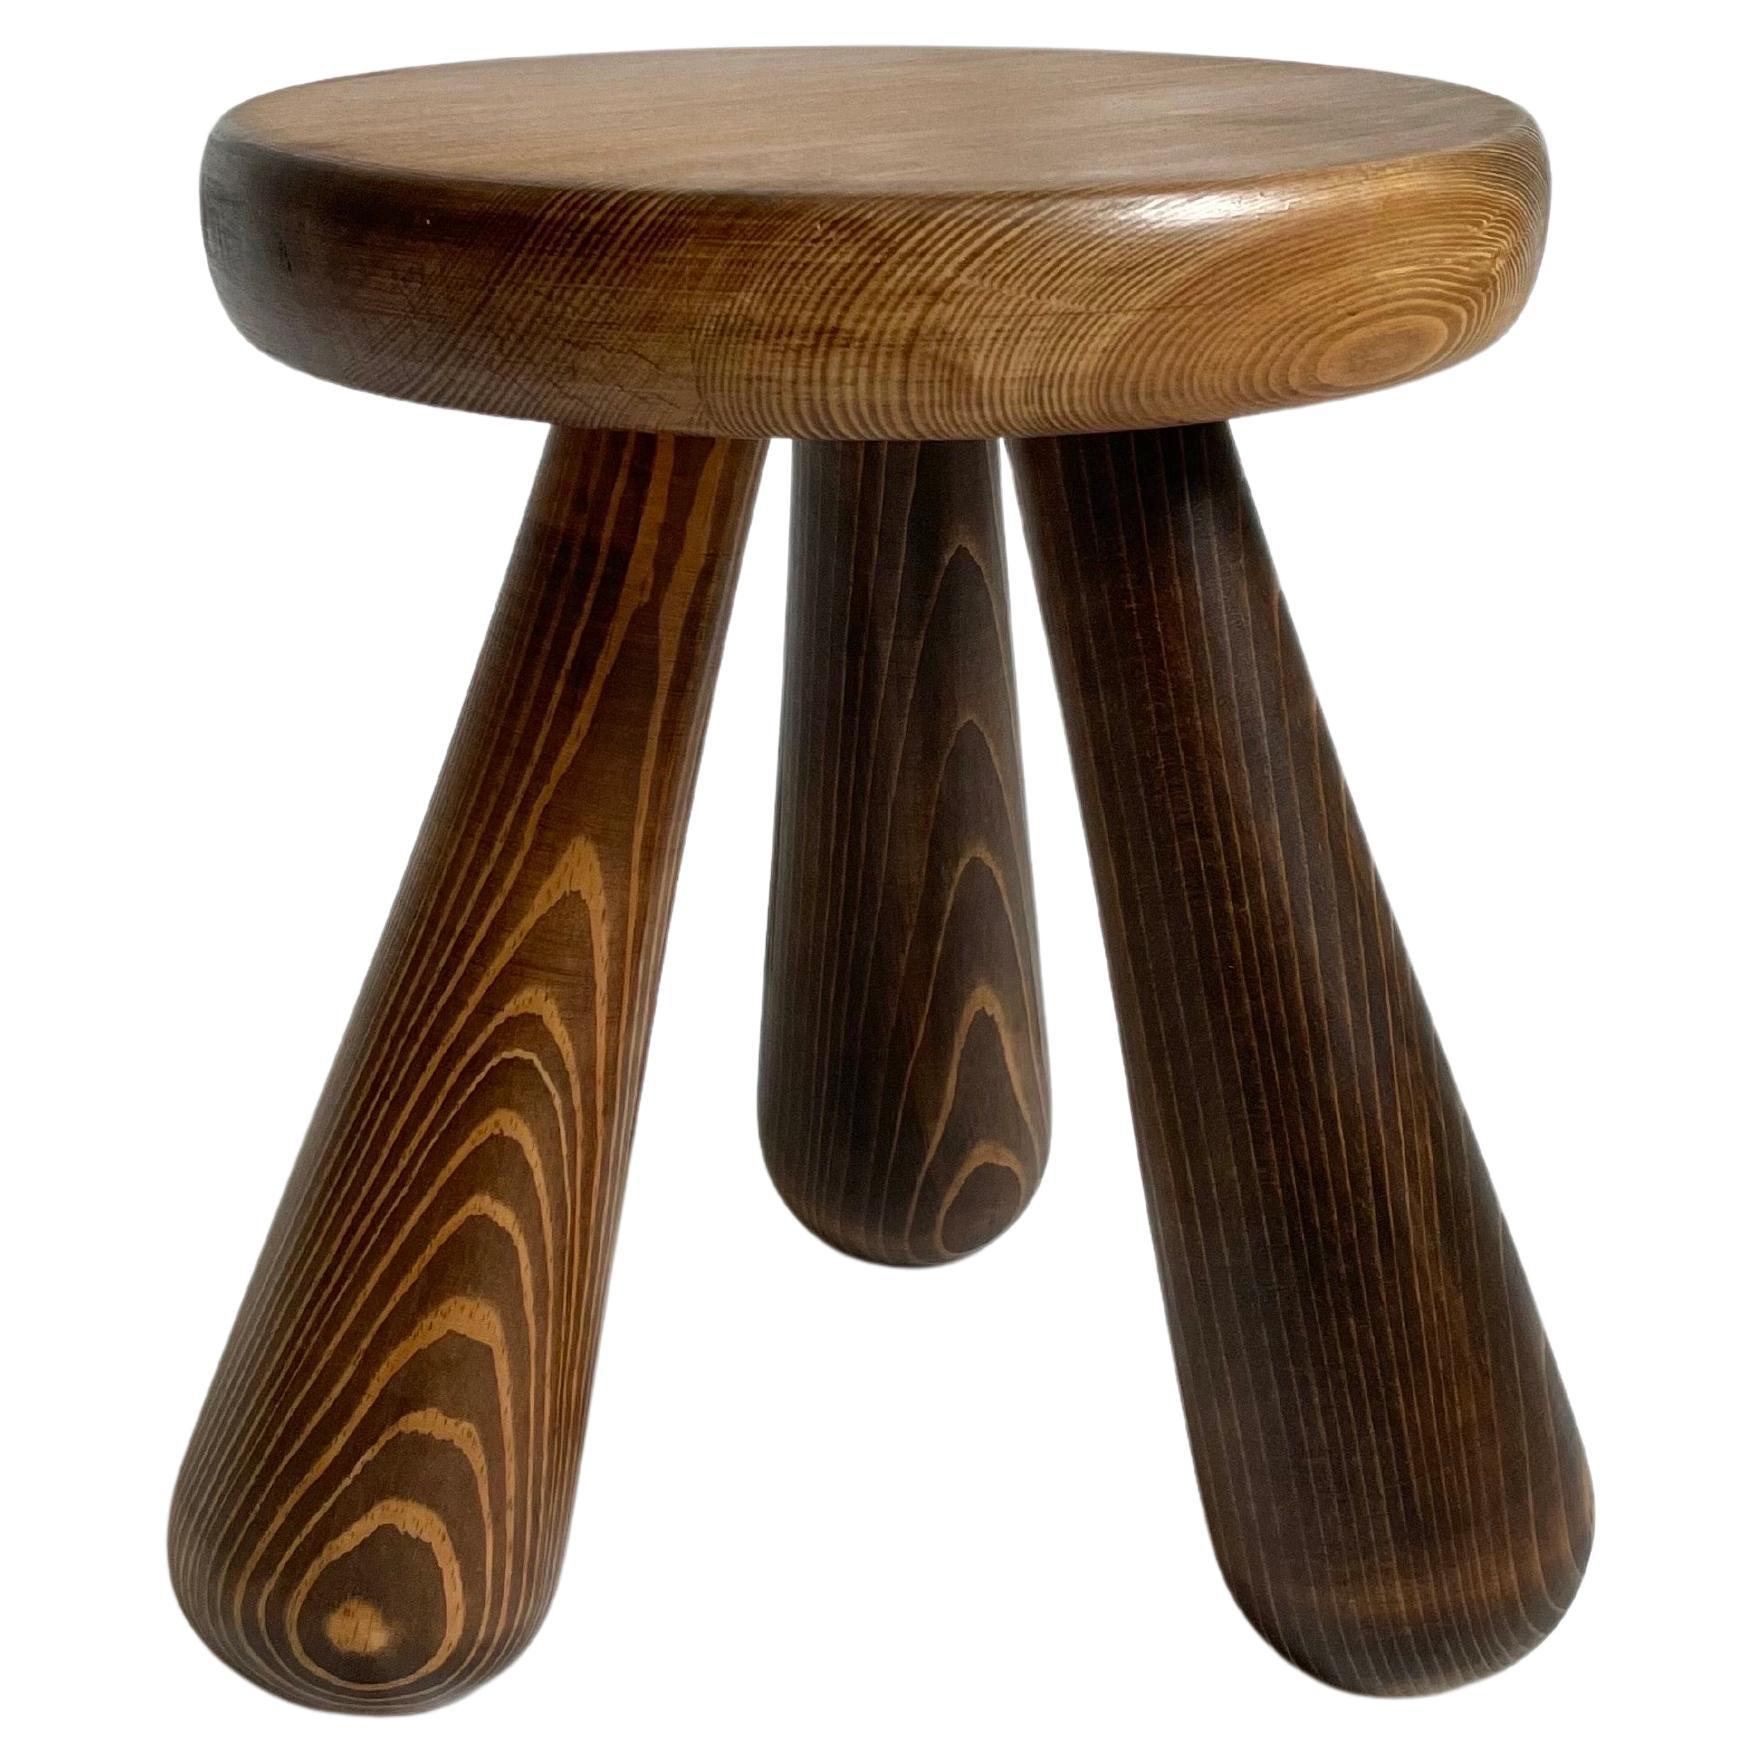 Swedish Country Wooden Foot Stool